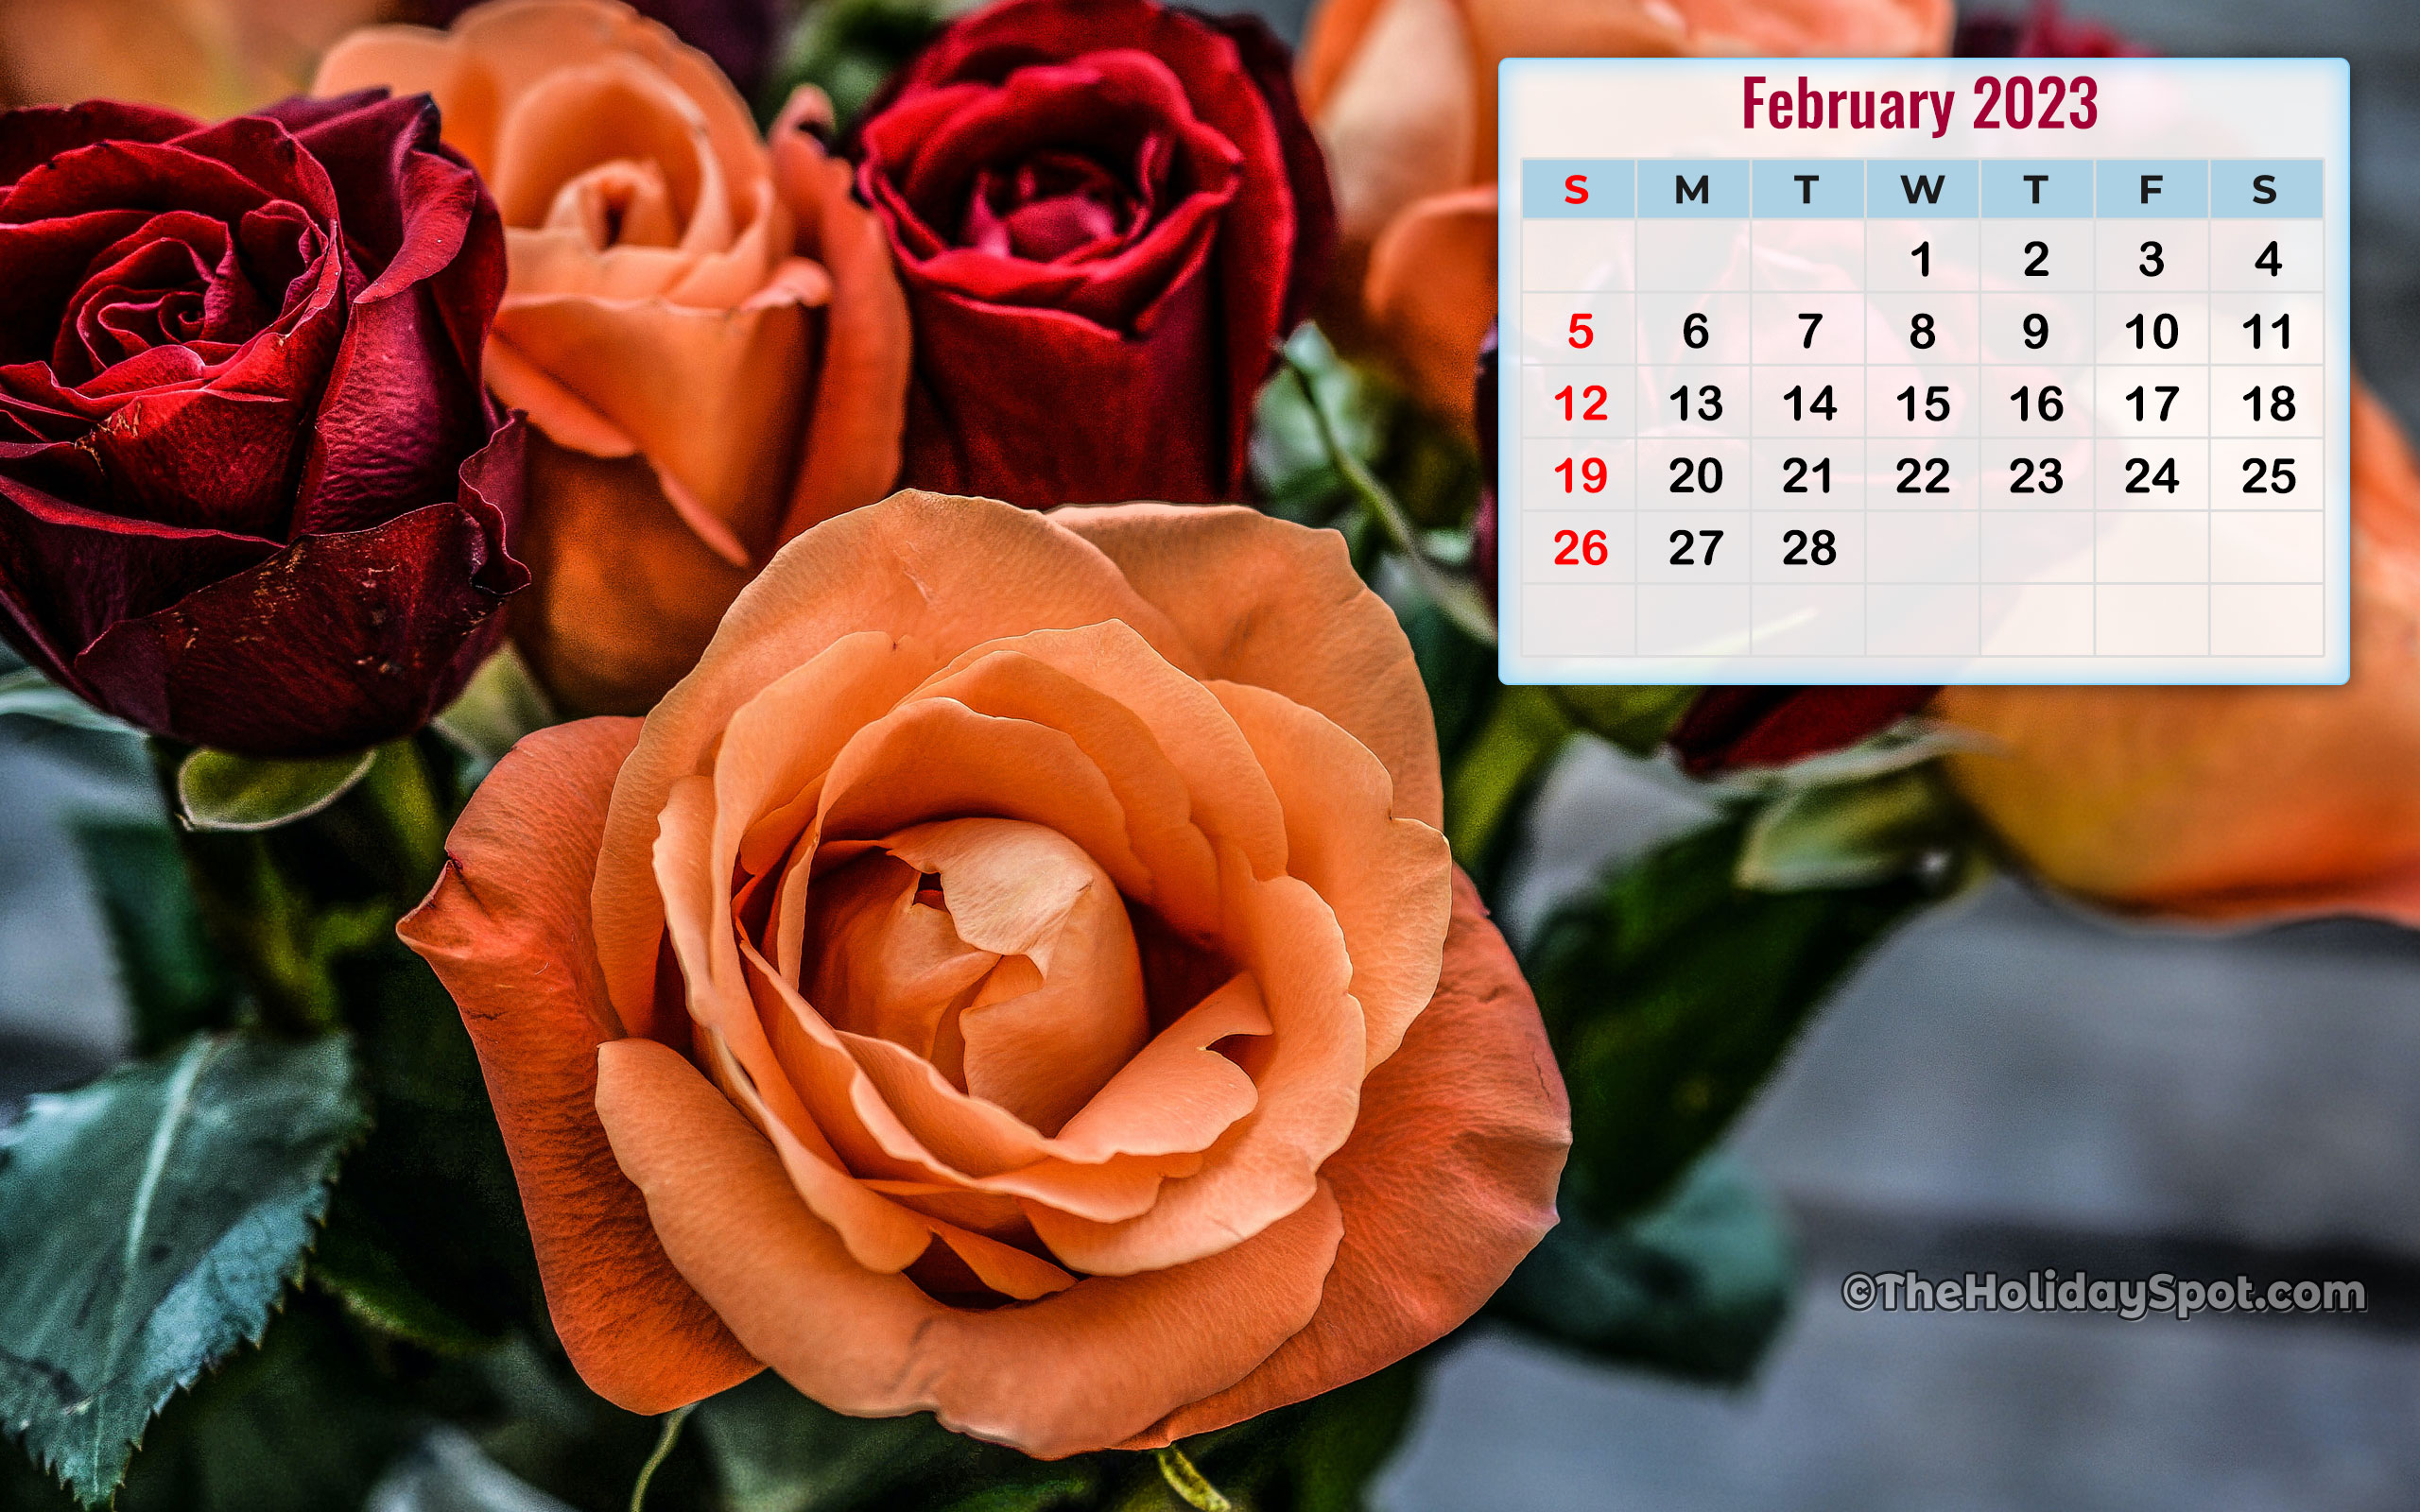 WTF1 on Twitter We have ALSO made the same 2023 Calendar for your desktop  background httpstcoTlUMN74Y4w  Twitter